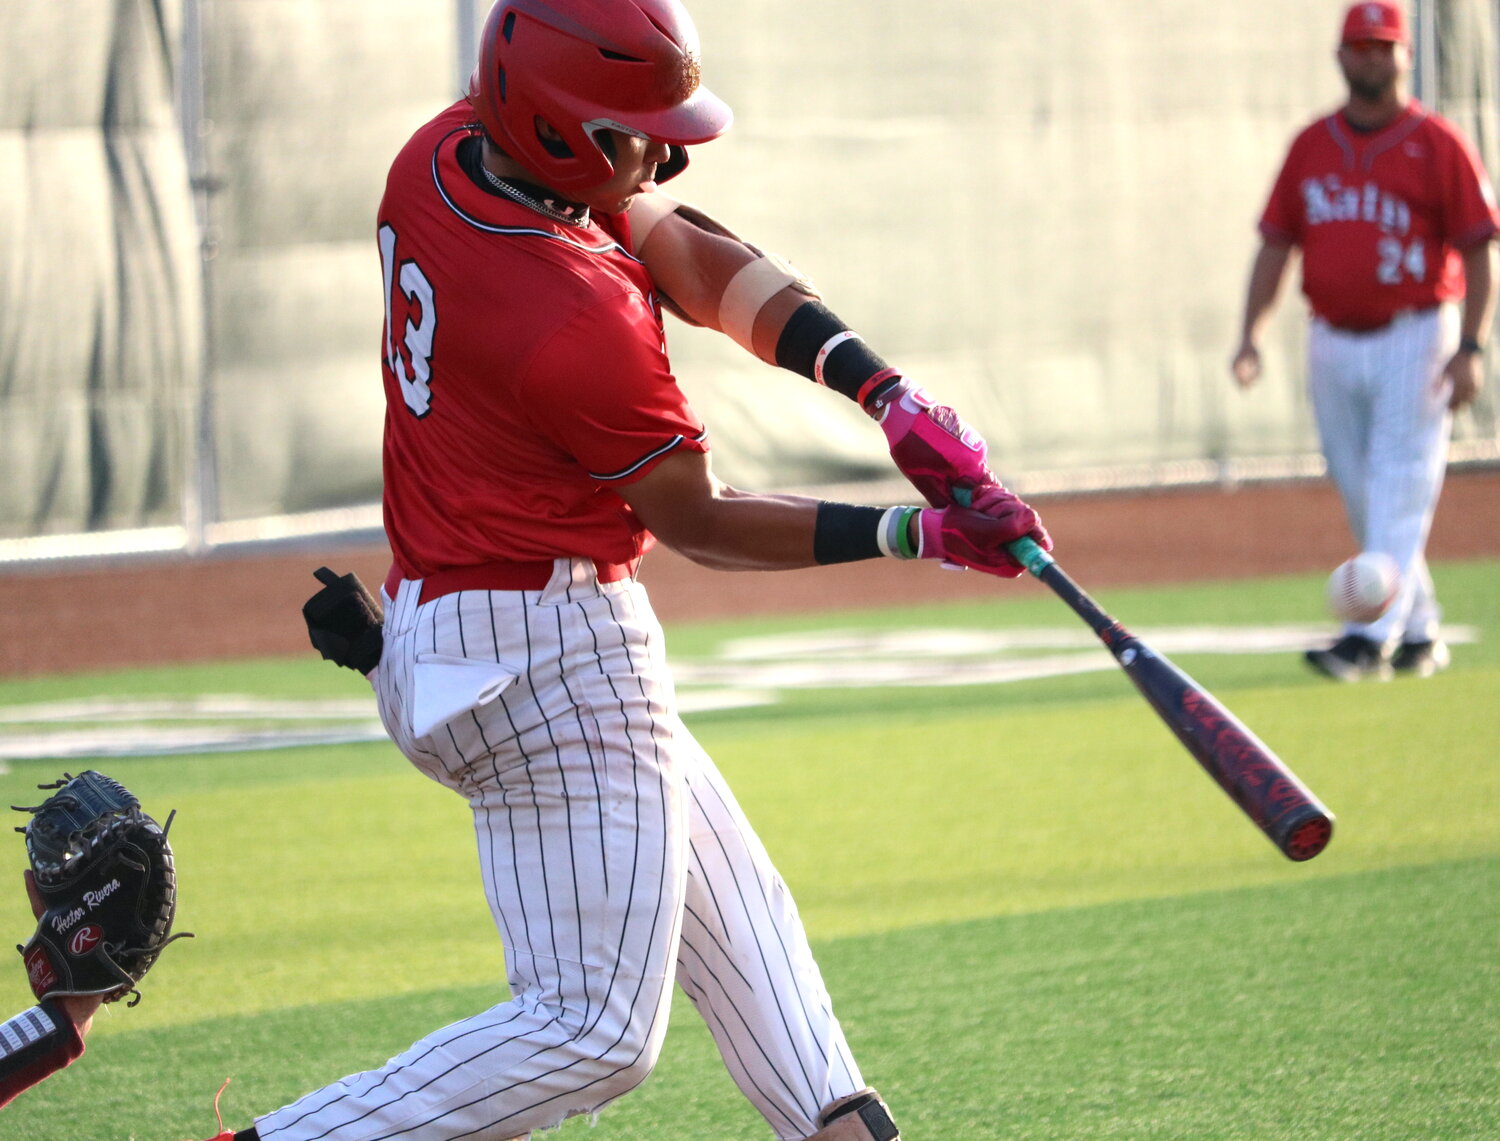 Nayden Ramirez hits during Friday's area round game between Katy and Cy-Fair at Langham Creek.